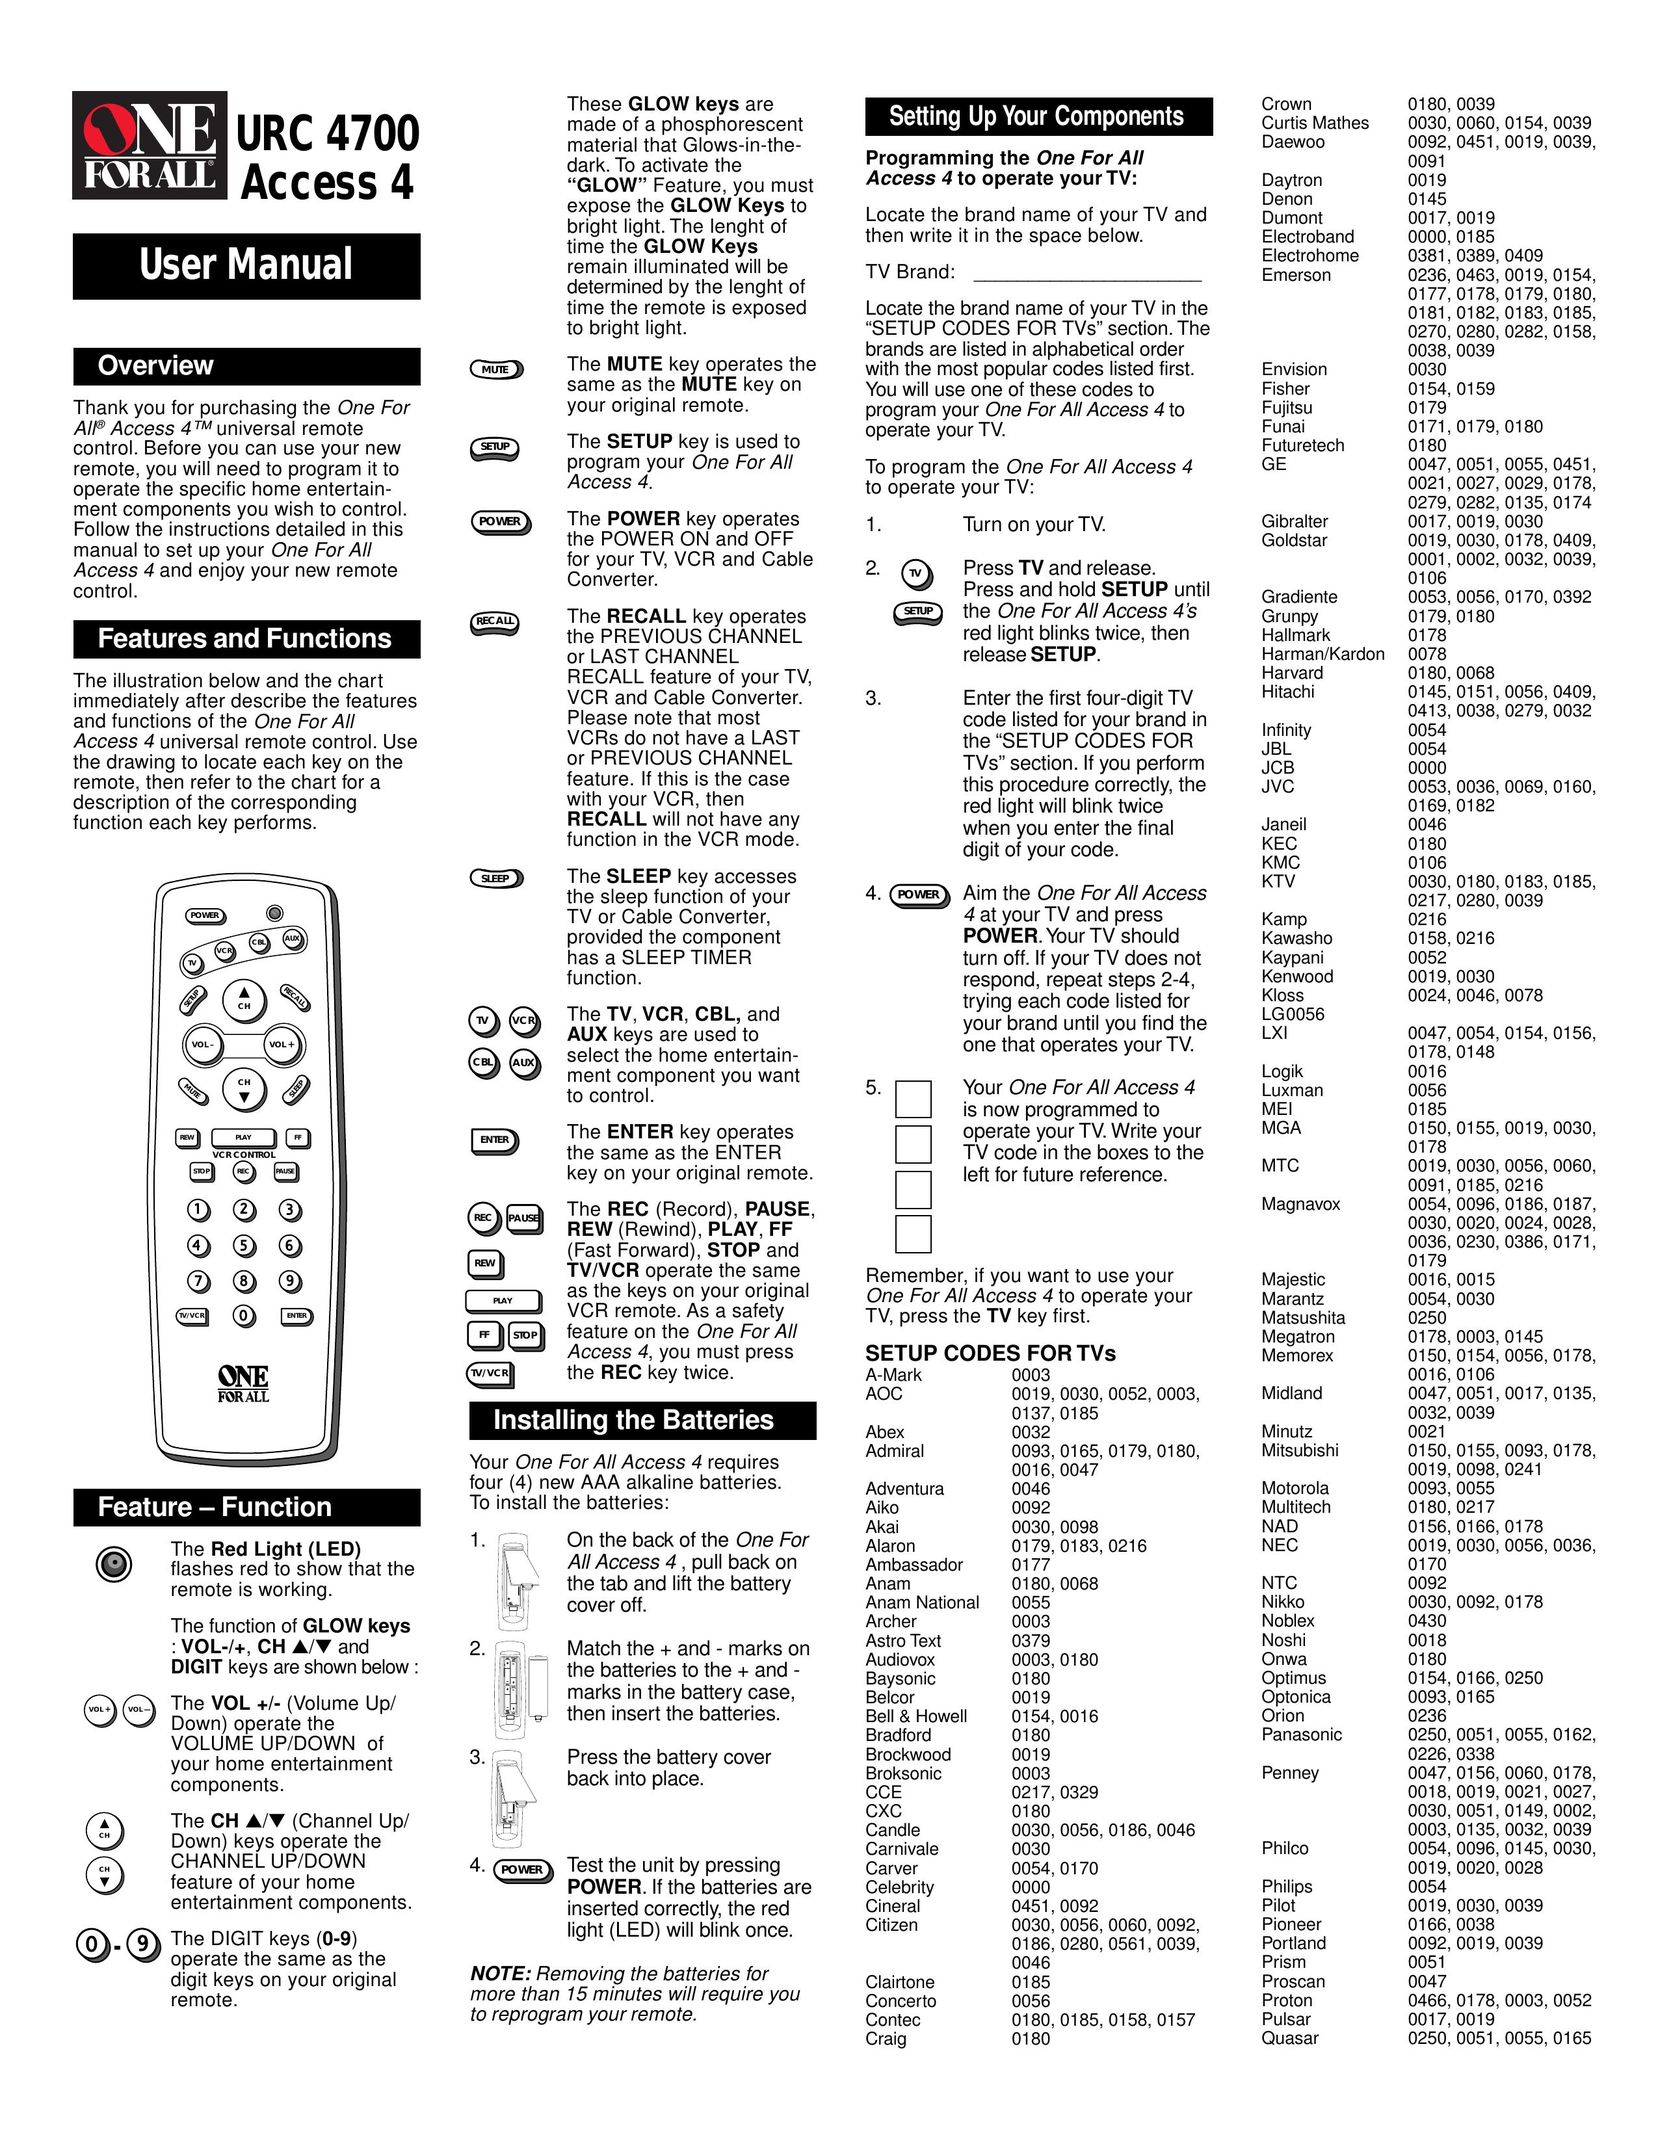 One for All URC 4700 Universal Remote User Manual